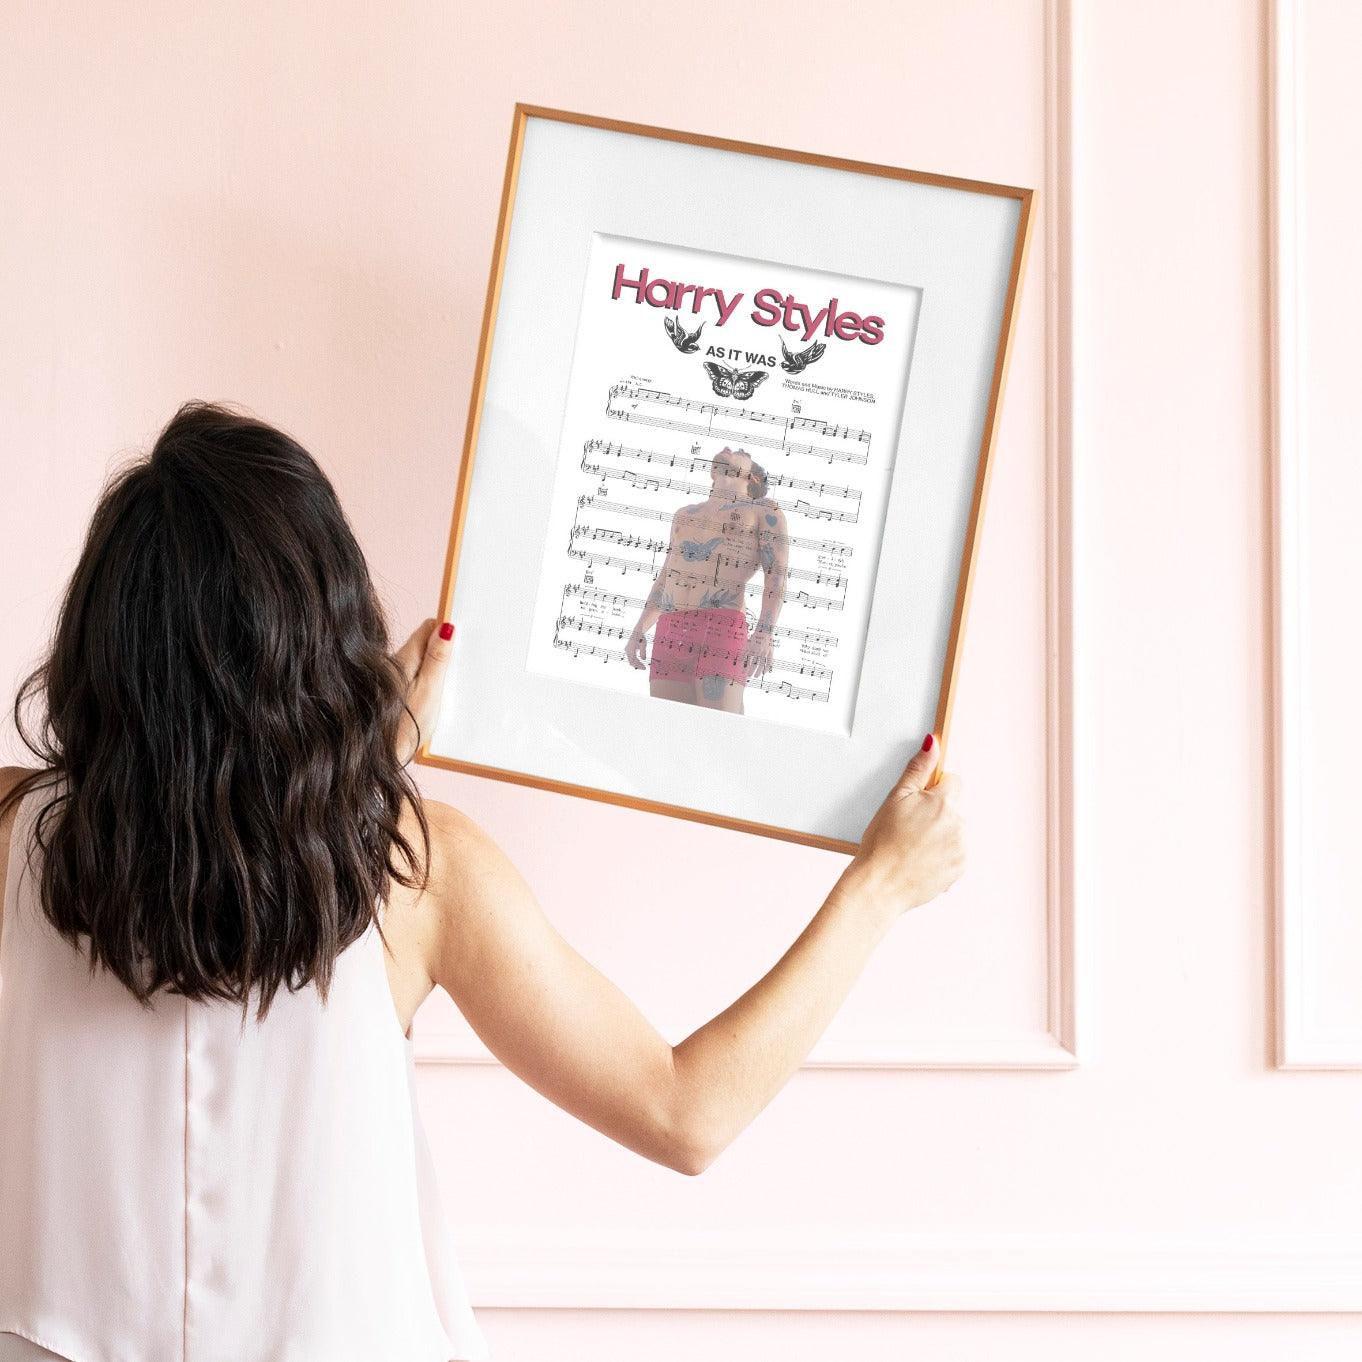 98Types Music has just released the Harry Styles - As It Was Poster. The poster is A1 size and is the perfect addition to any music lover's wall art. The poster has the lyrics to the song "Watermelon Sugar" printed on it.